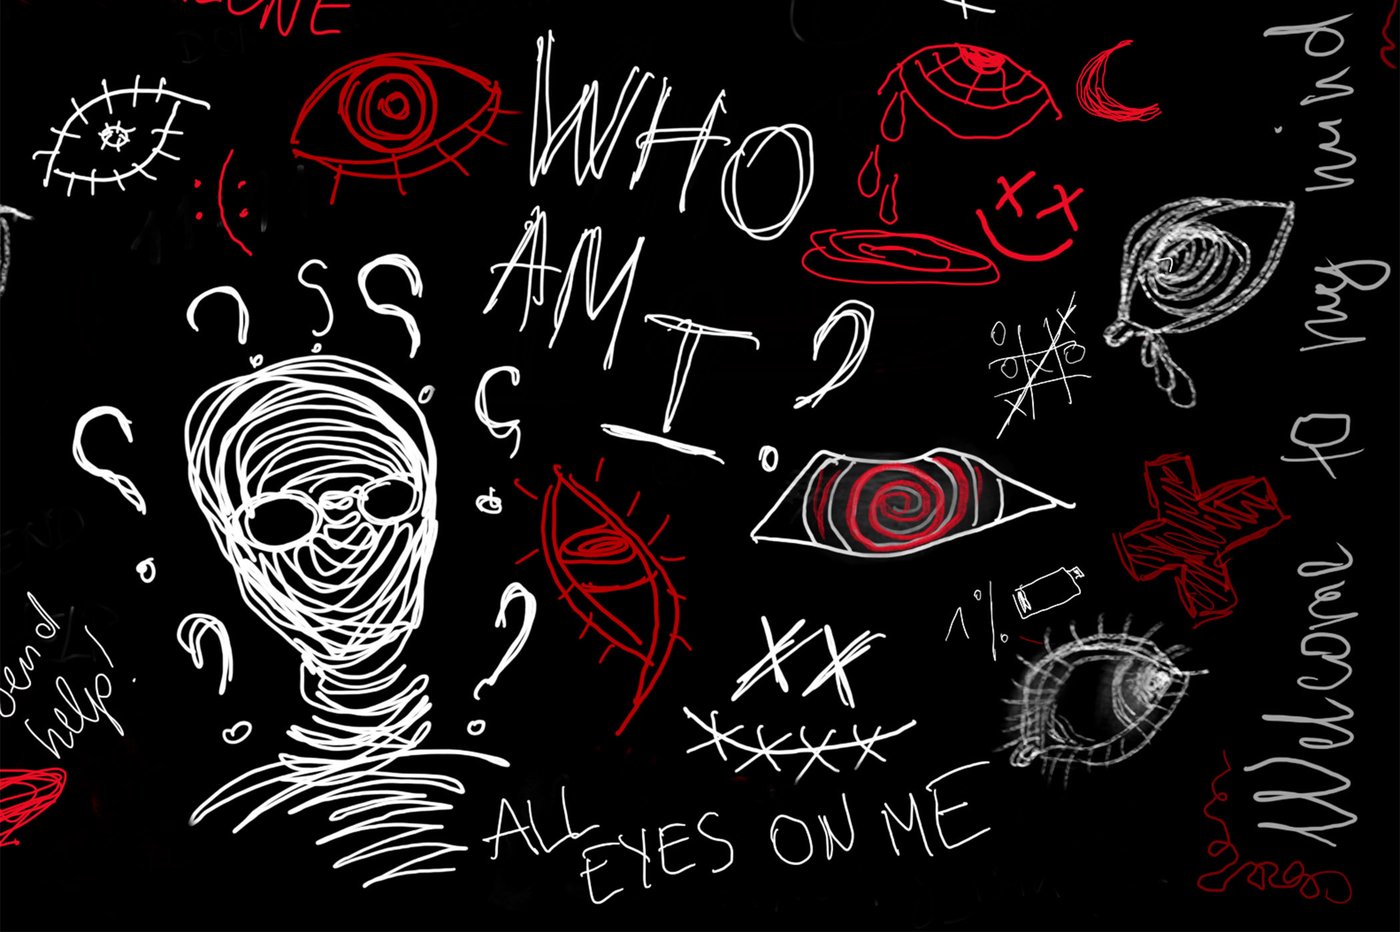 On black background there are several different white and red scribbles. In the lower left part of the graphic there is a human head surrounded with question marks, stylized eyes, and sayings (Who am I? All eyes on me). On the right edge of the image is written vertically "Welcome to my mind".